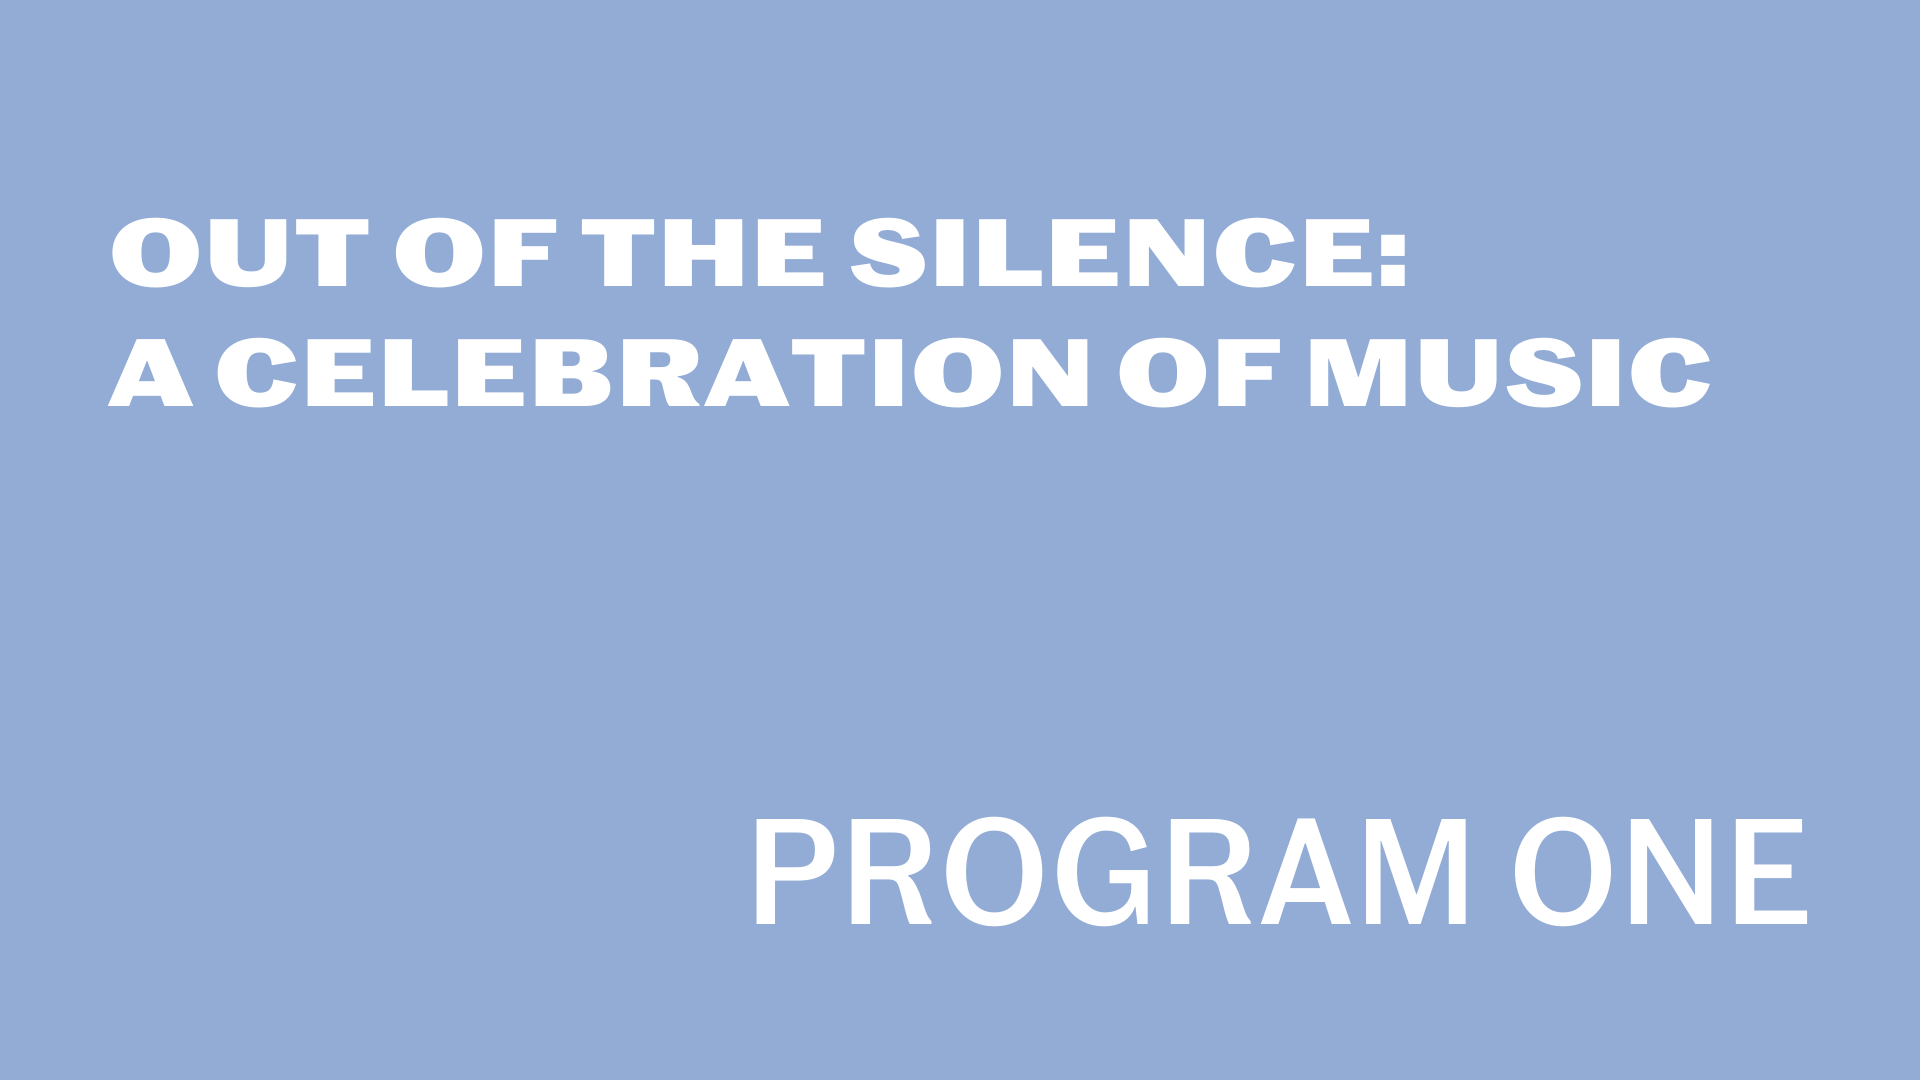 Visit https://fishercenter.bard.edu/events/out-of-the-silence-1/